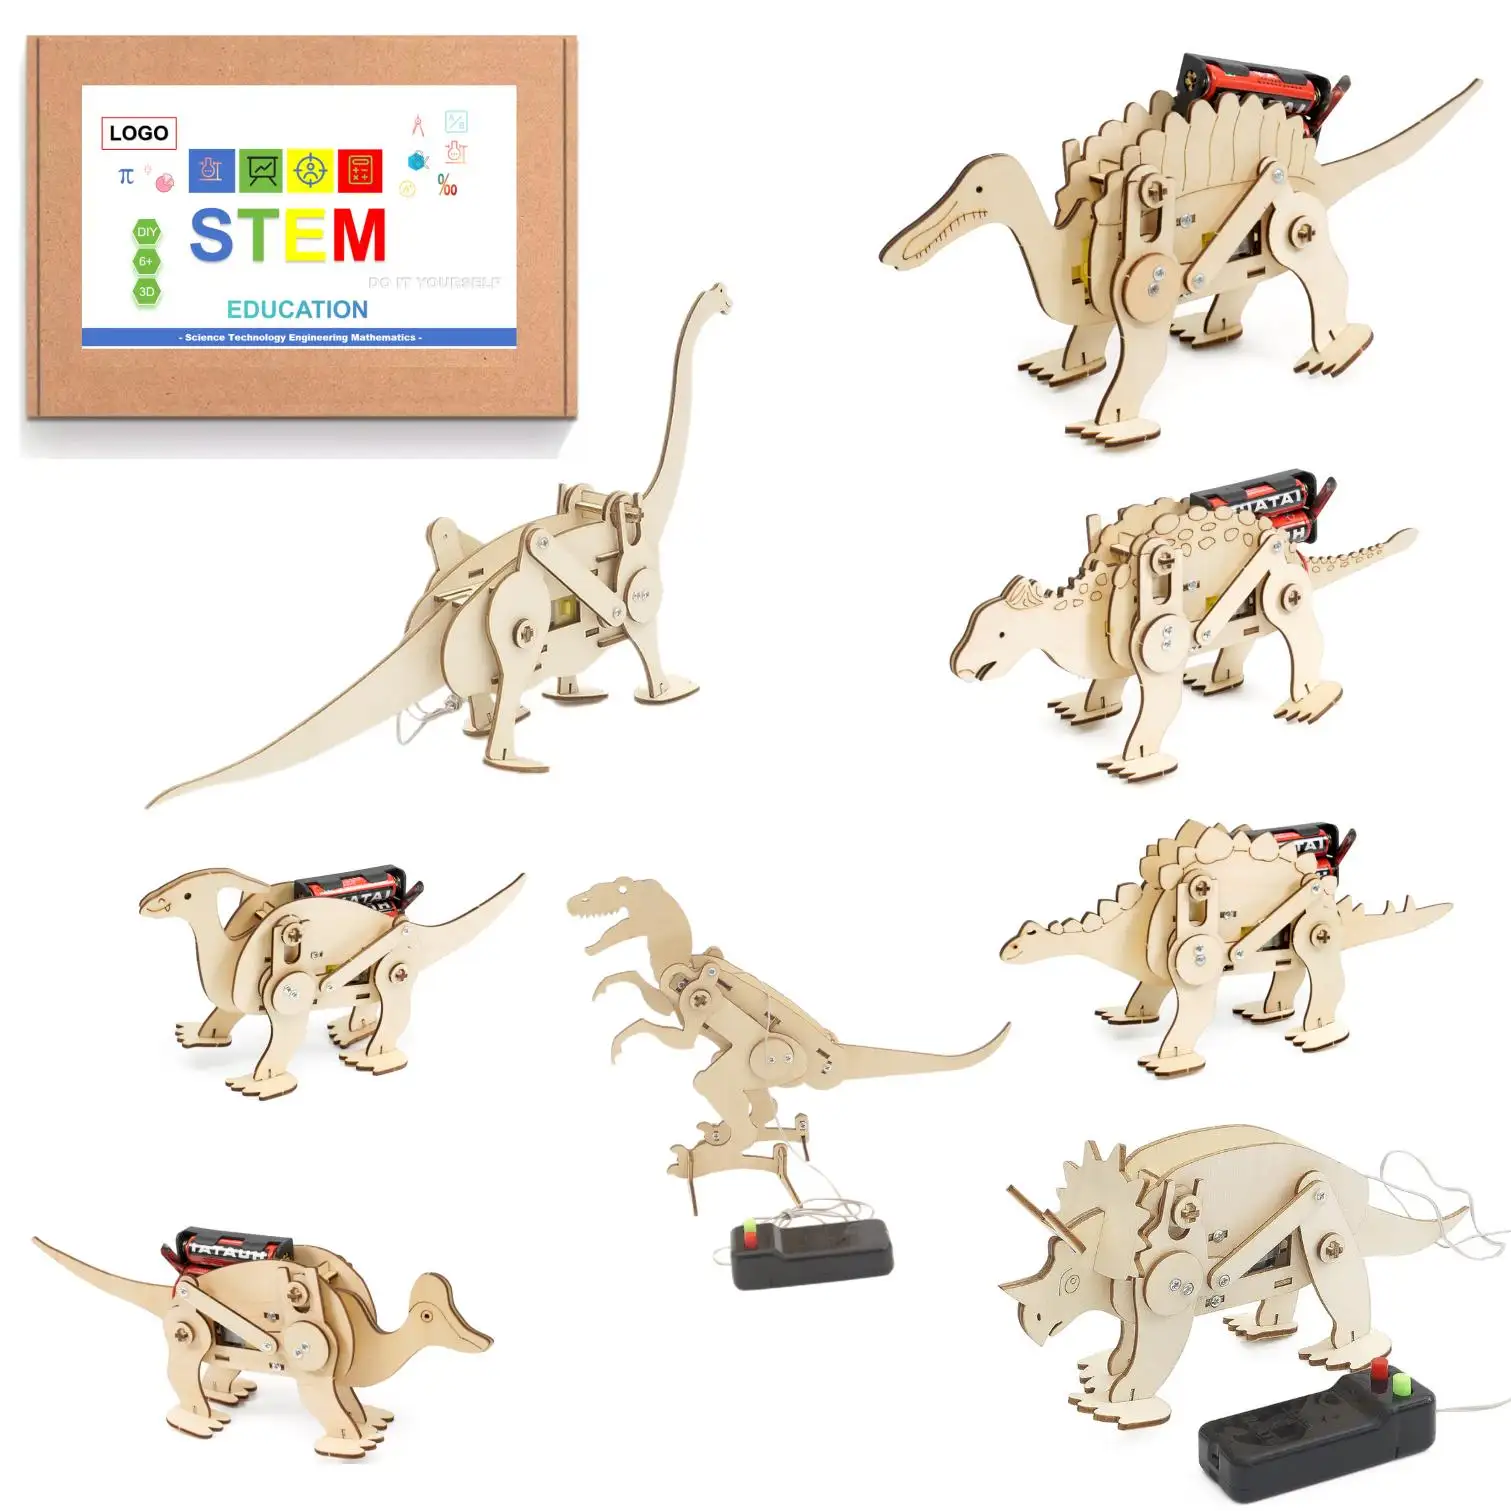 MI Learning Resources Educational Toys Science Engineering Toys 3D Wooden Dinosaur Puzzle Children's Jigsaw Puzzles DIY STEM Toy